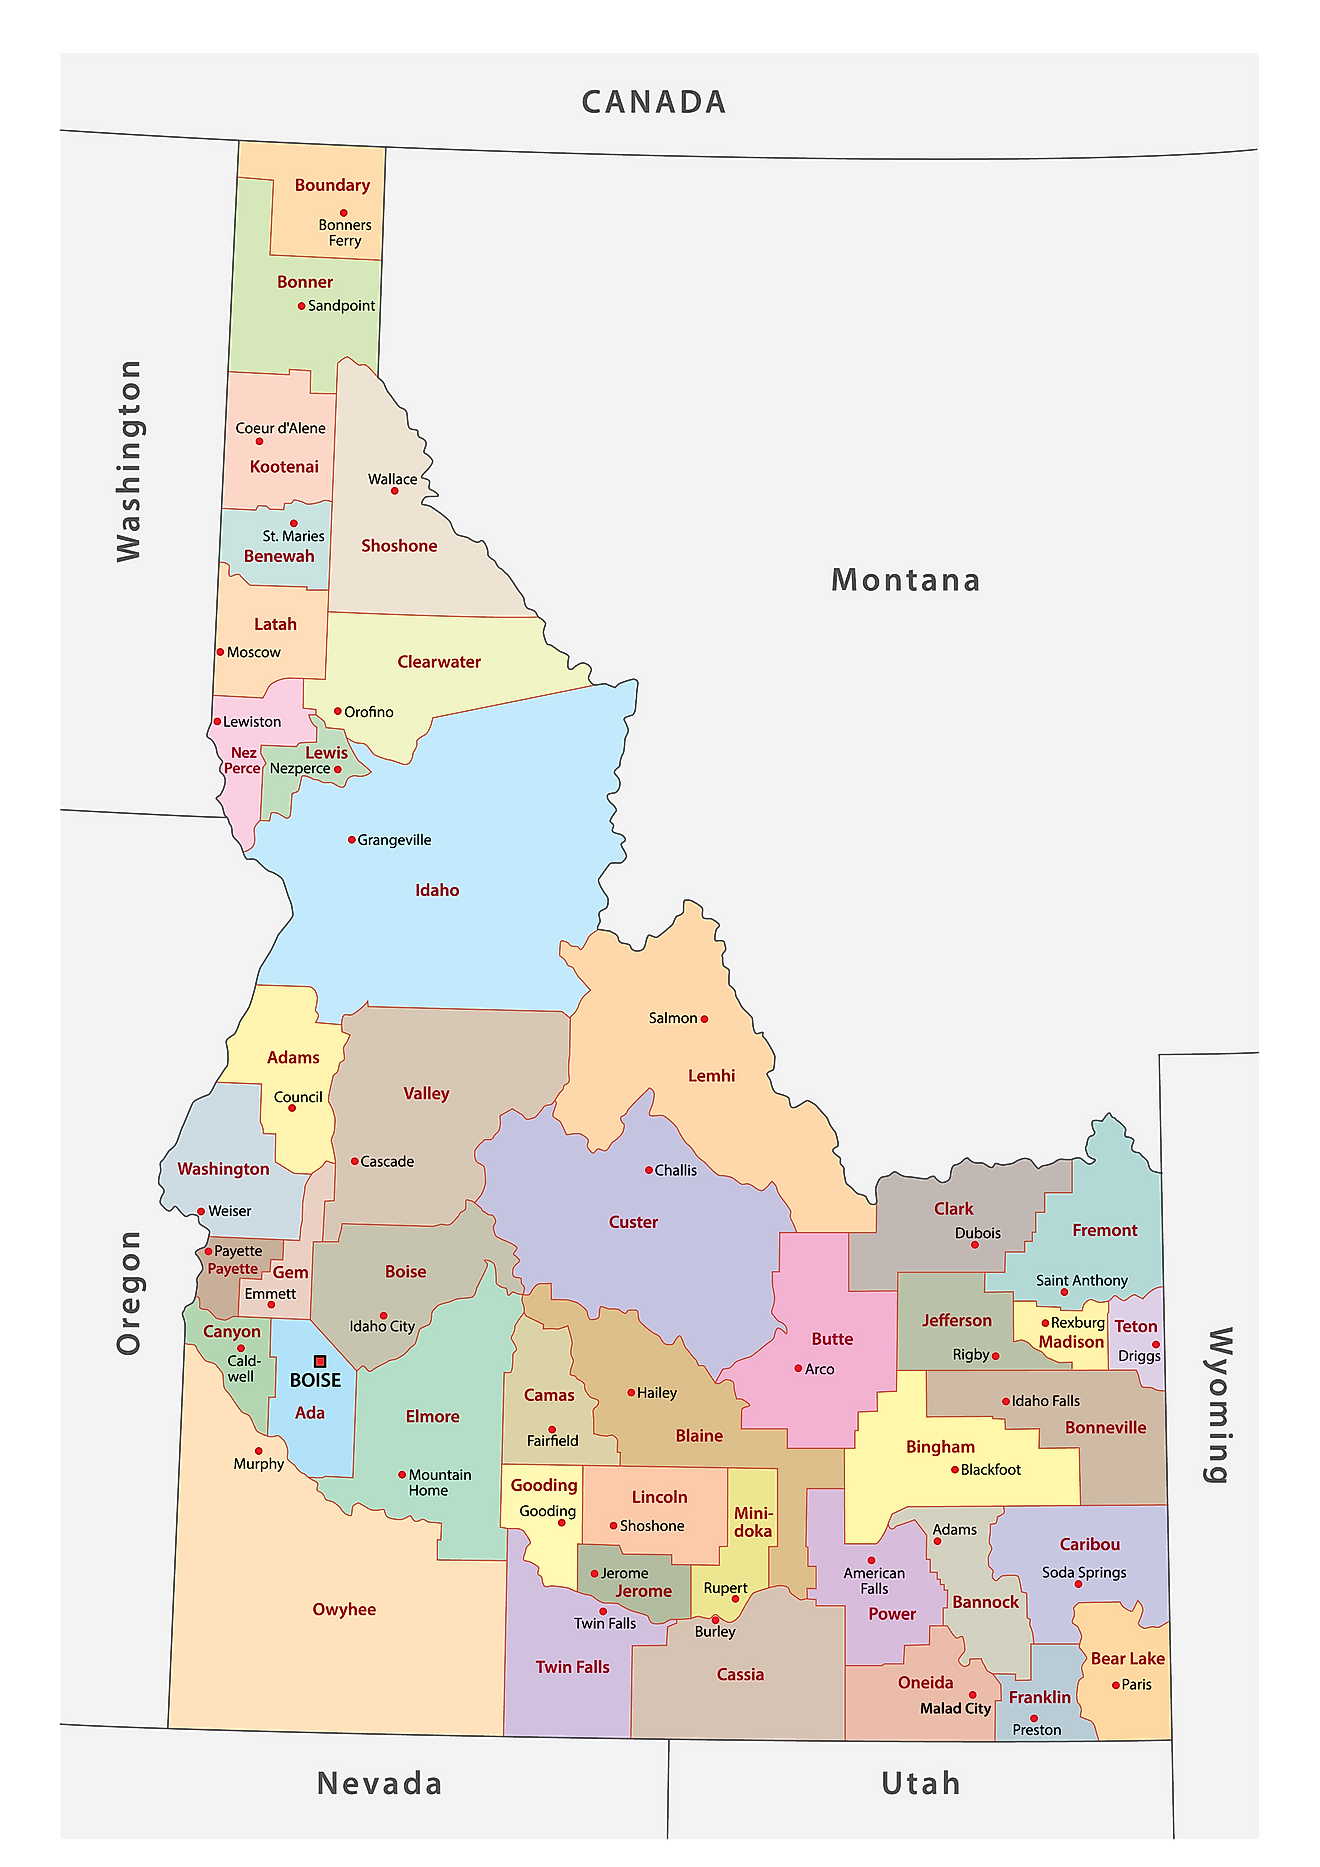 Administrative Map of Idaho showing its 44 counties and the capital city - Boise